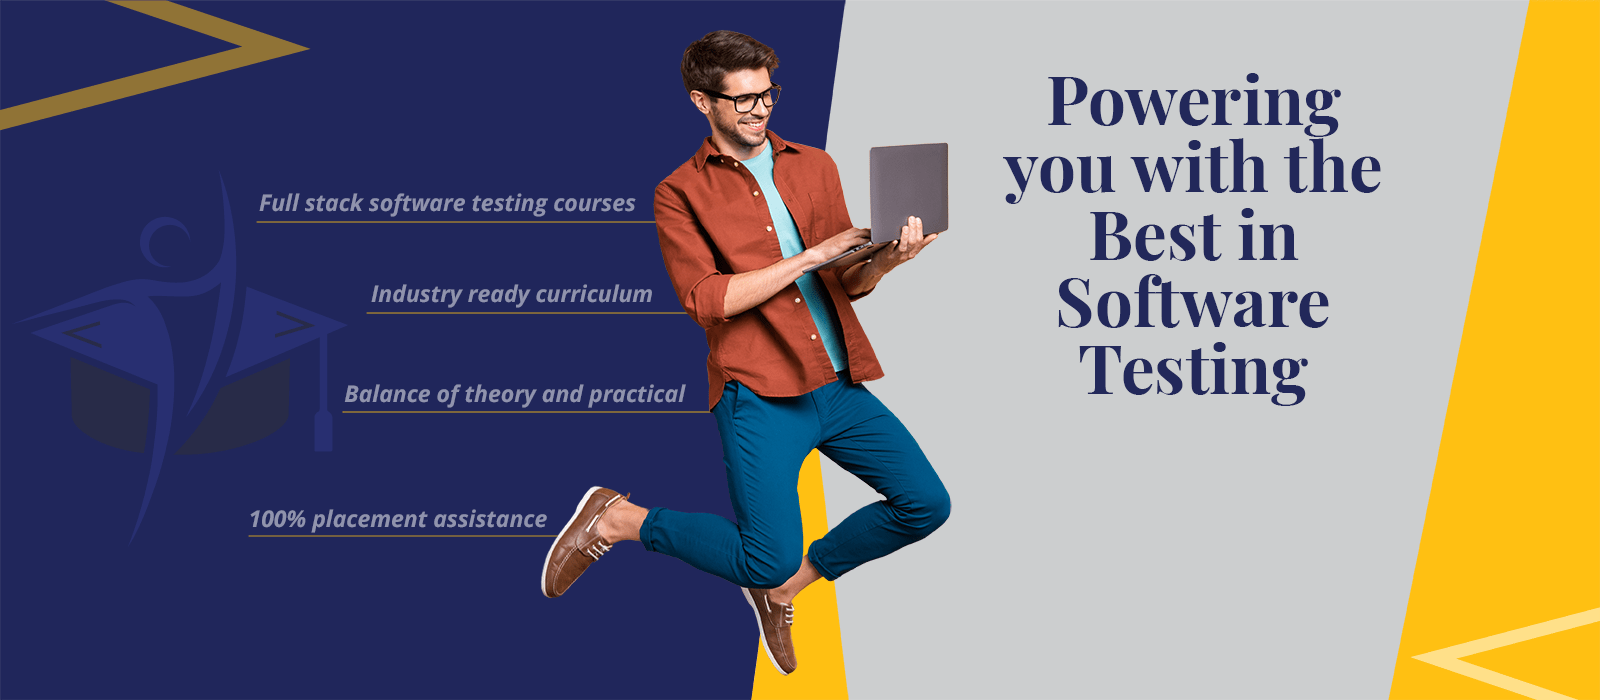 Powering you with the best in software testing - PathGlow